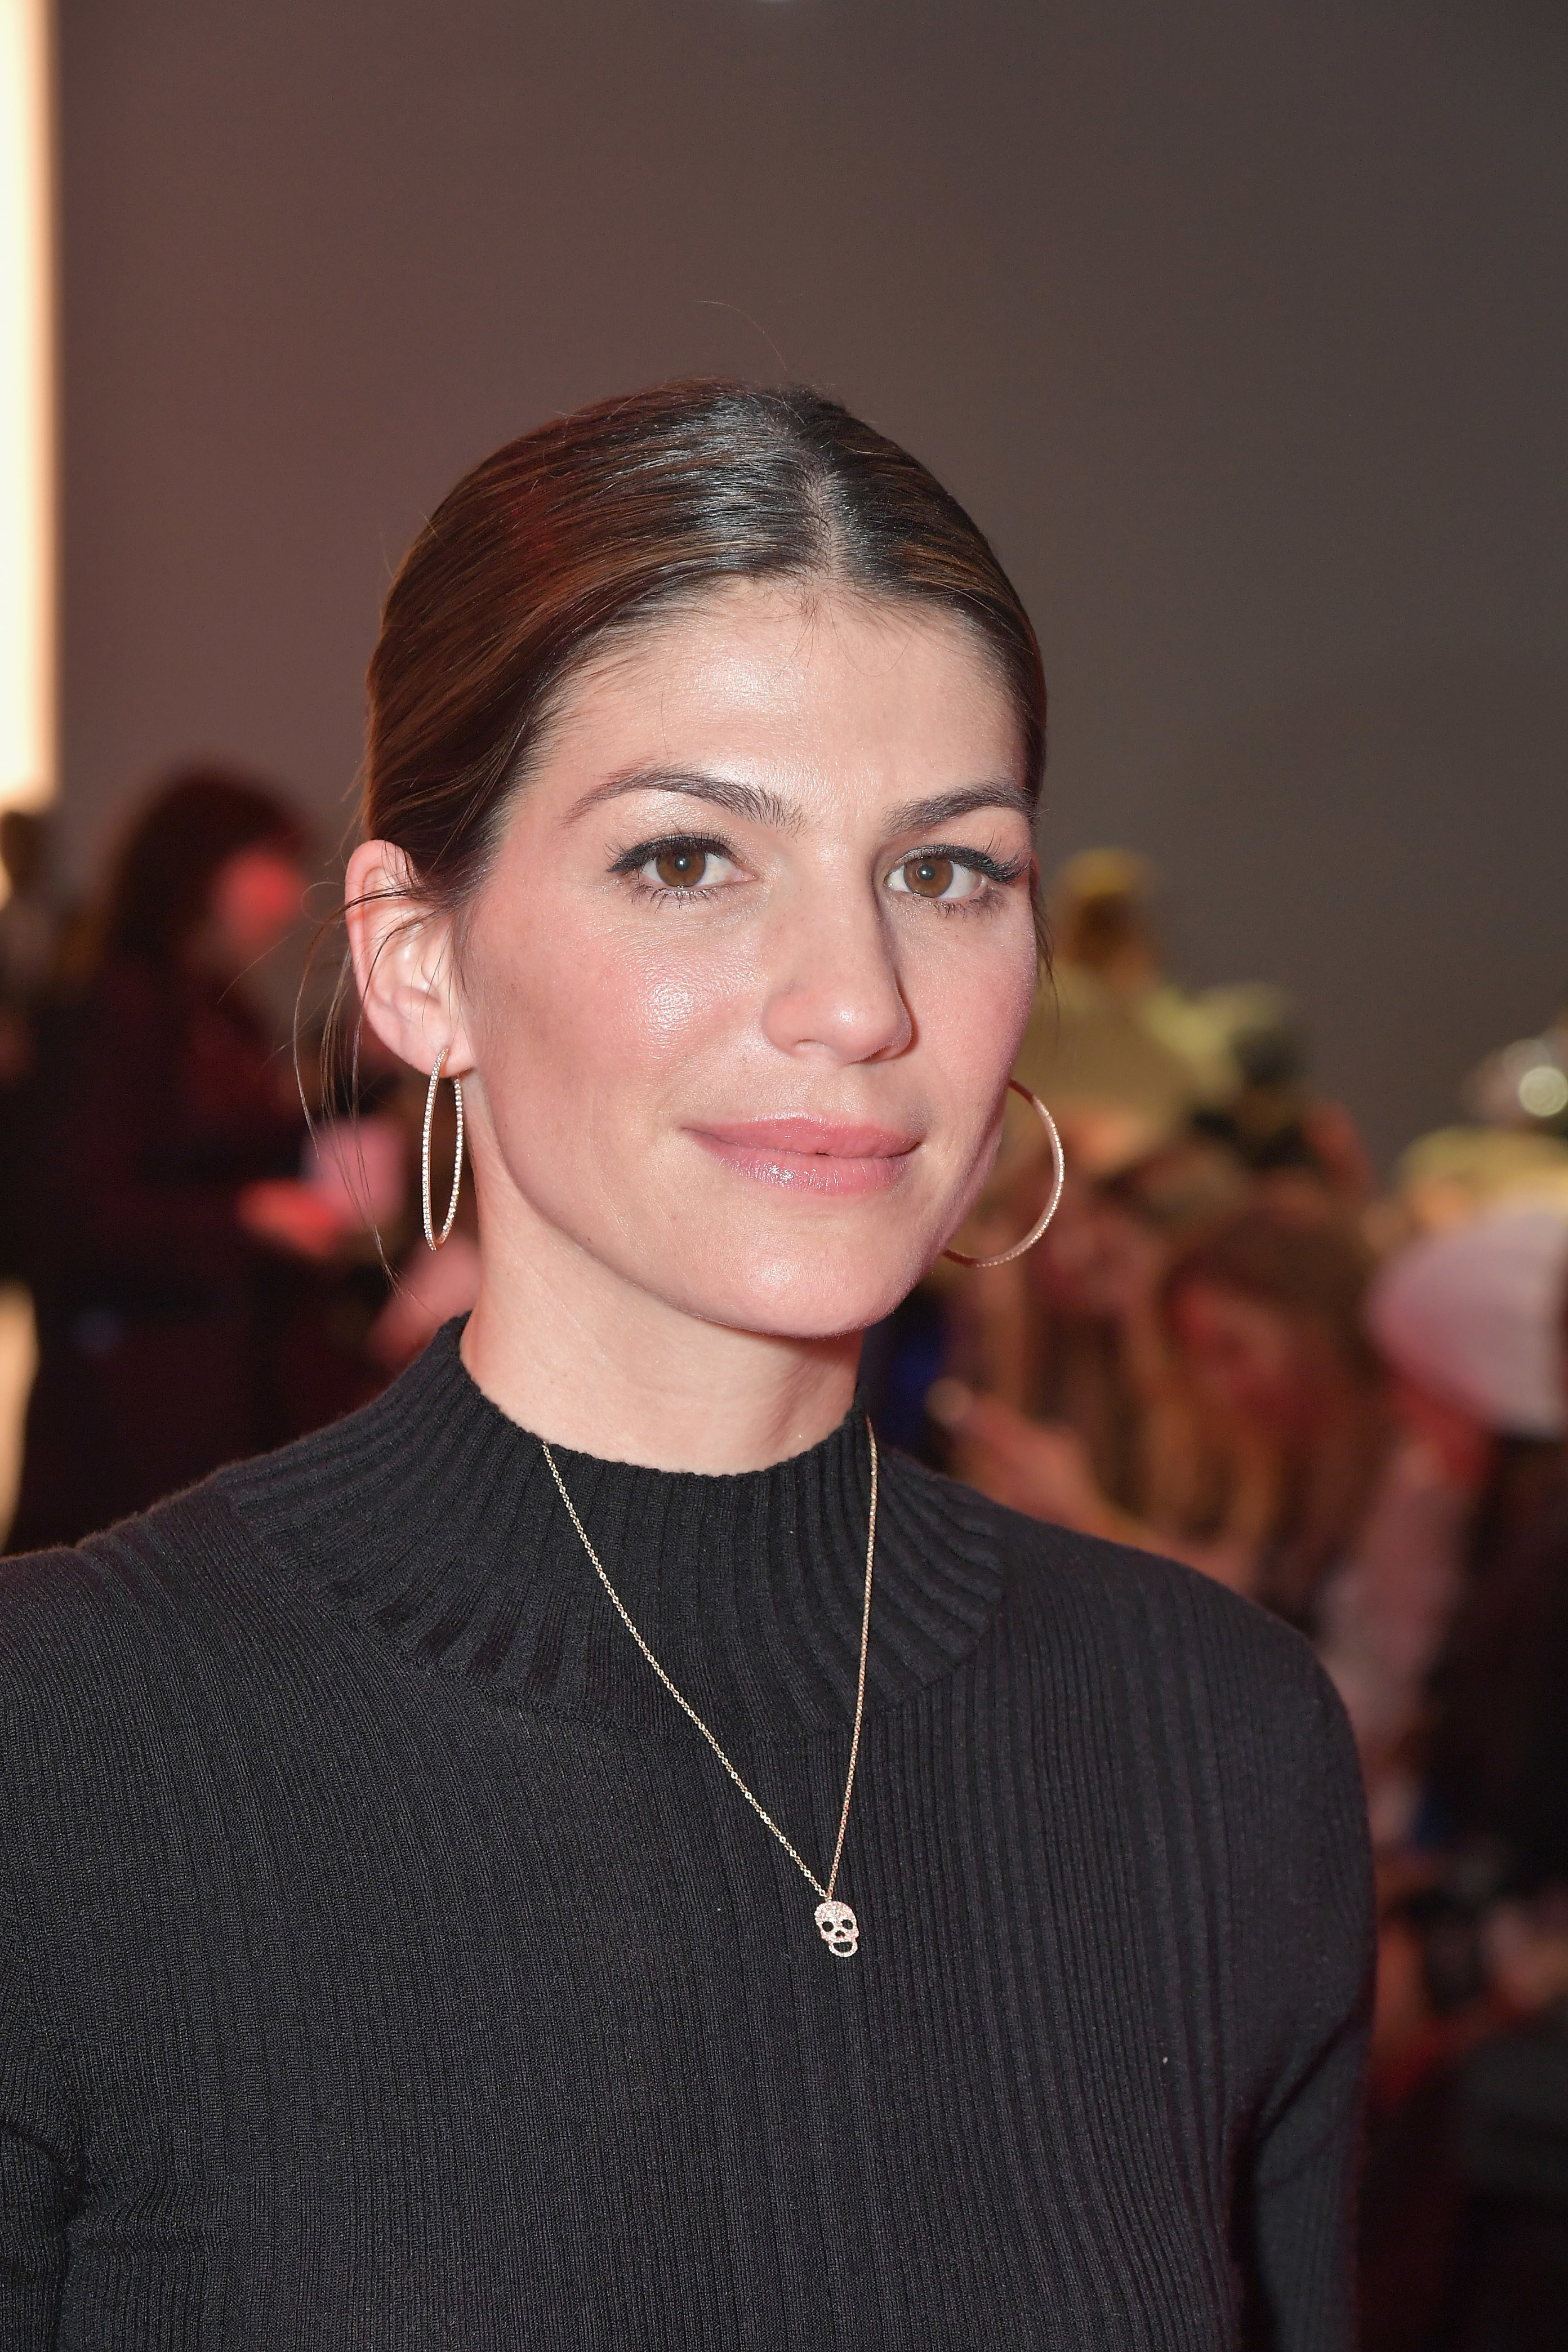 Genevieve Padalecki Says She Had Her Breast Implants Removed Because Her Body "Didn't Feel Right"